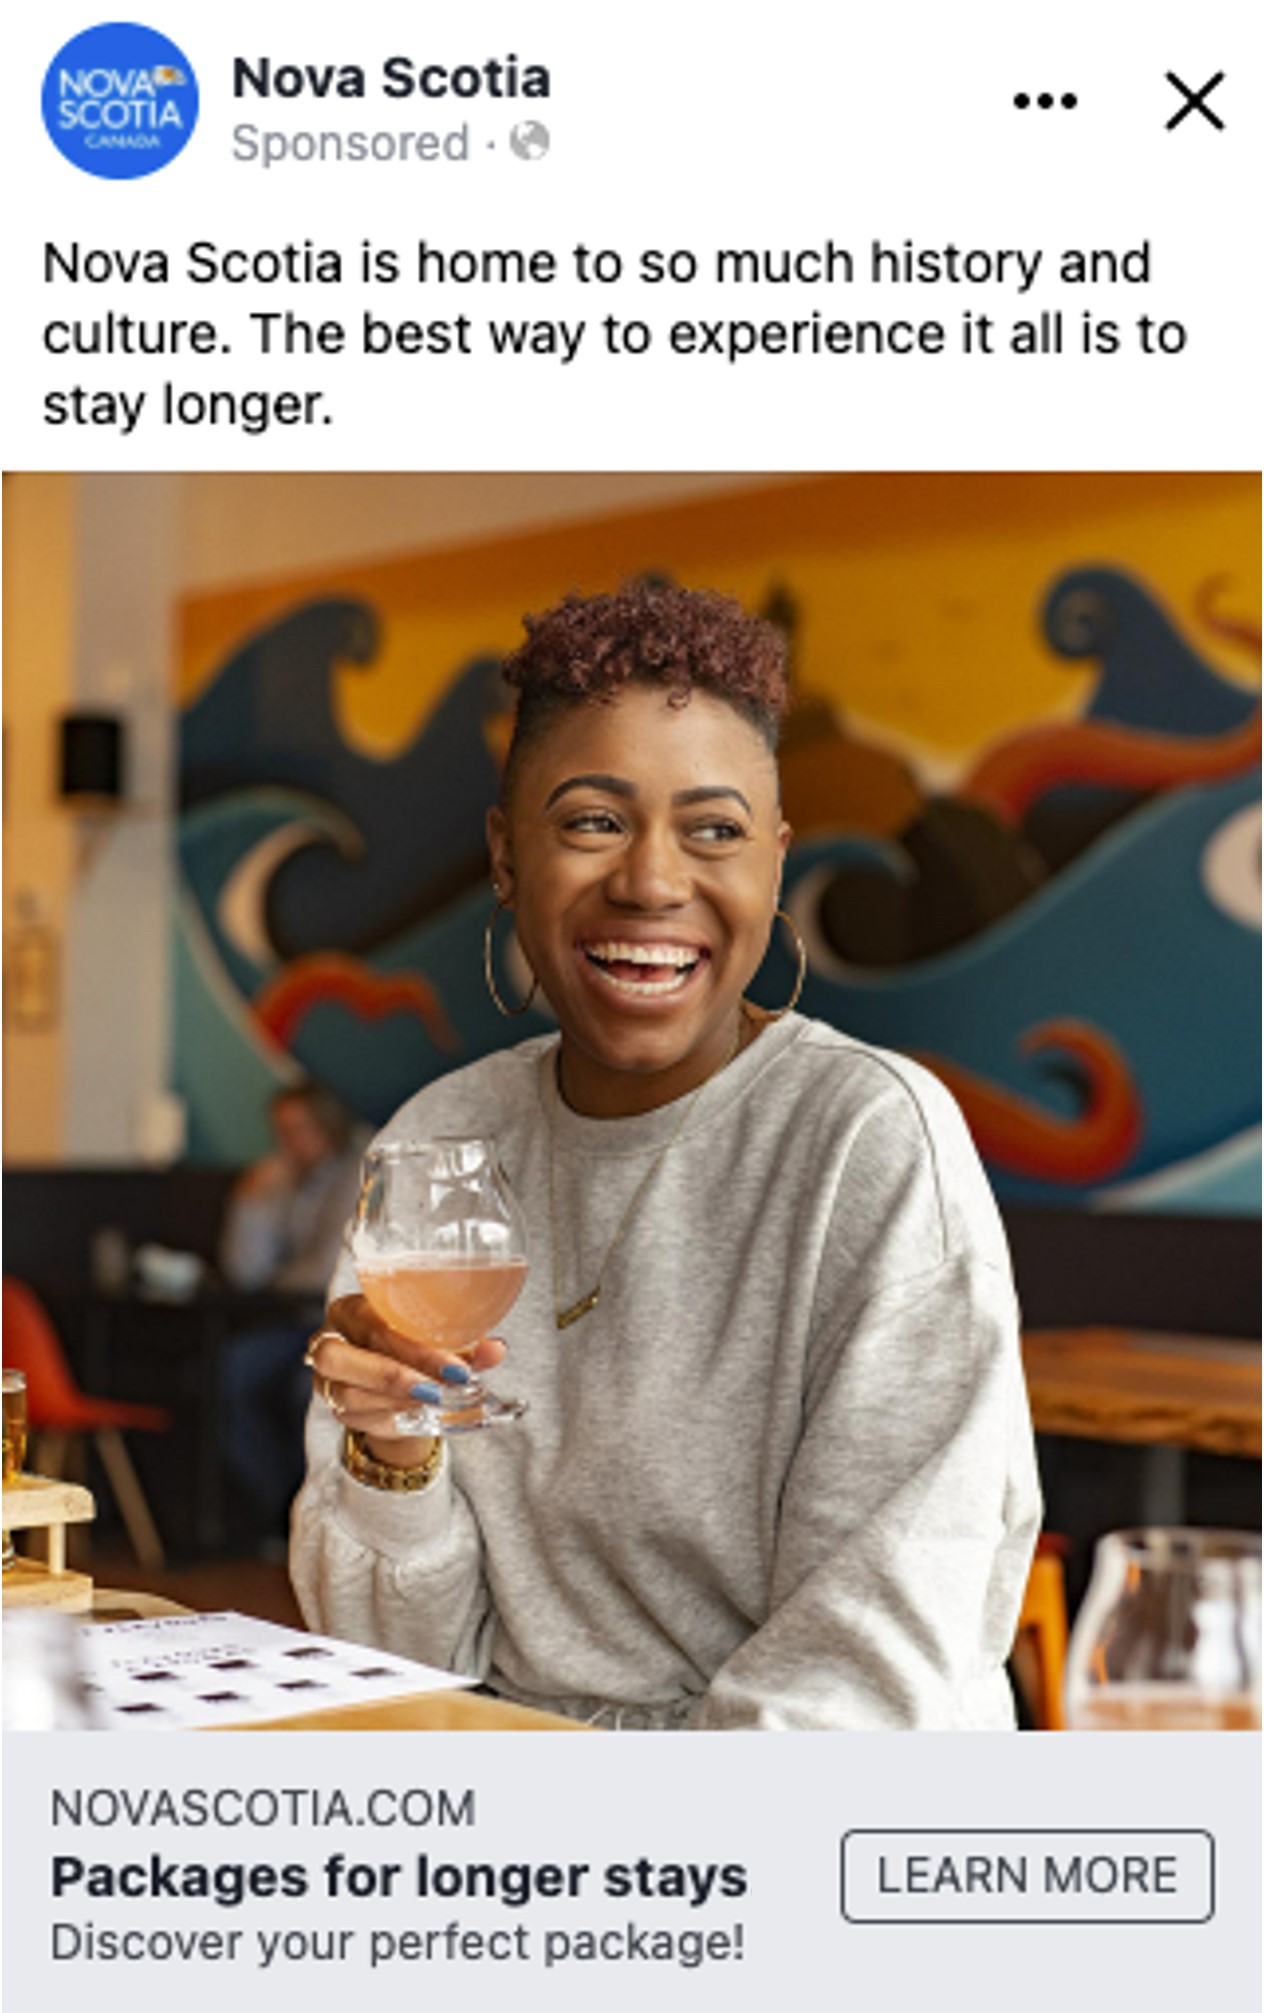 Screen shot of a Facebook ad on the Nova Scotia page. Image is a woman smiling and holding a glass of beer.